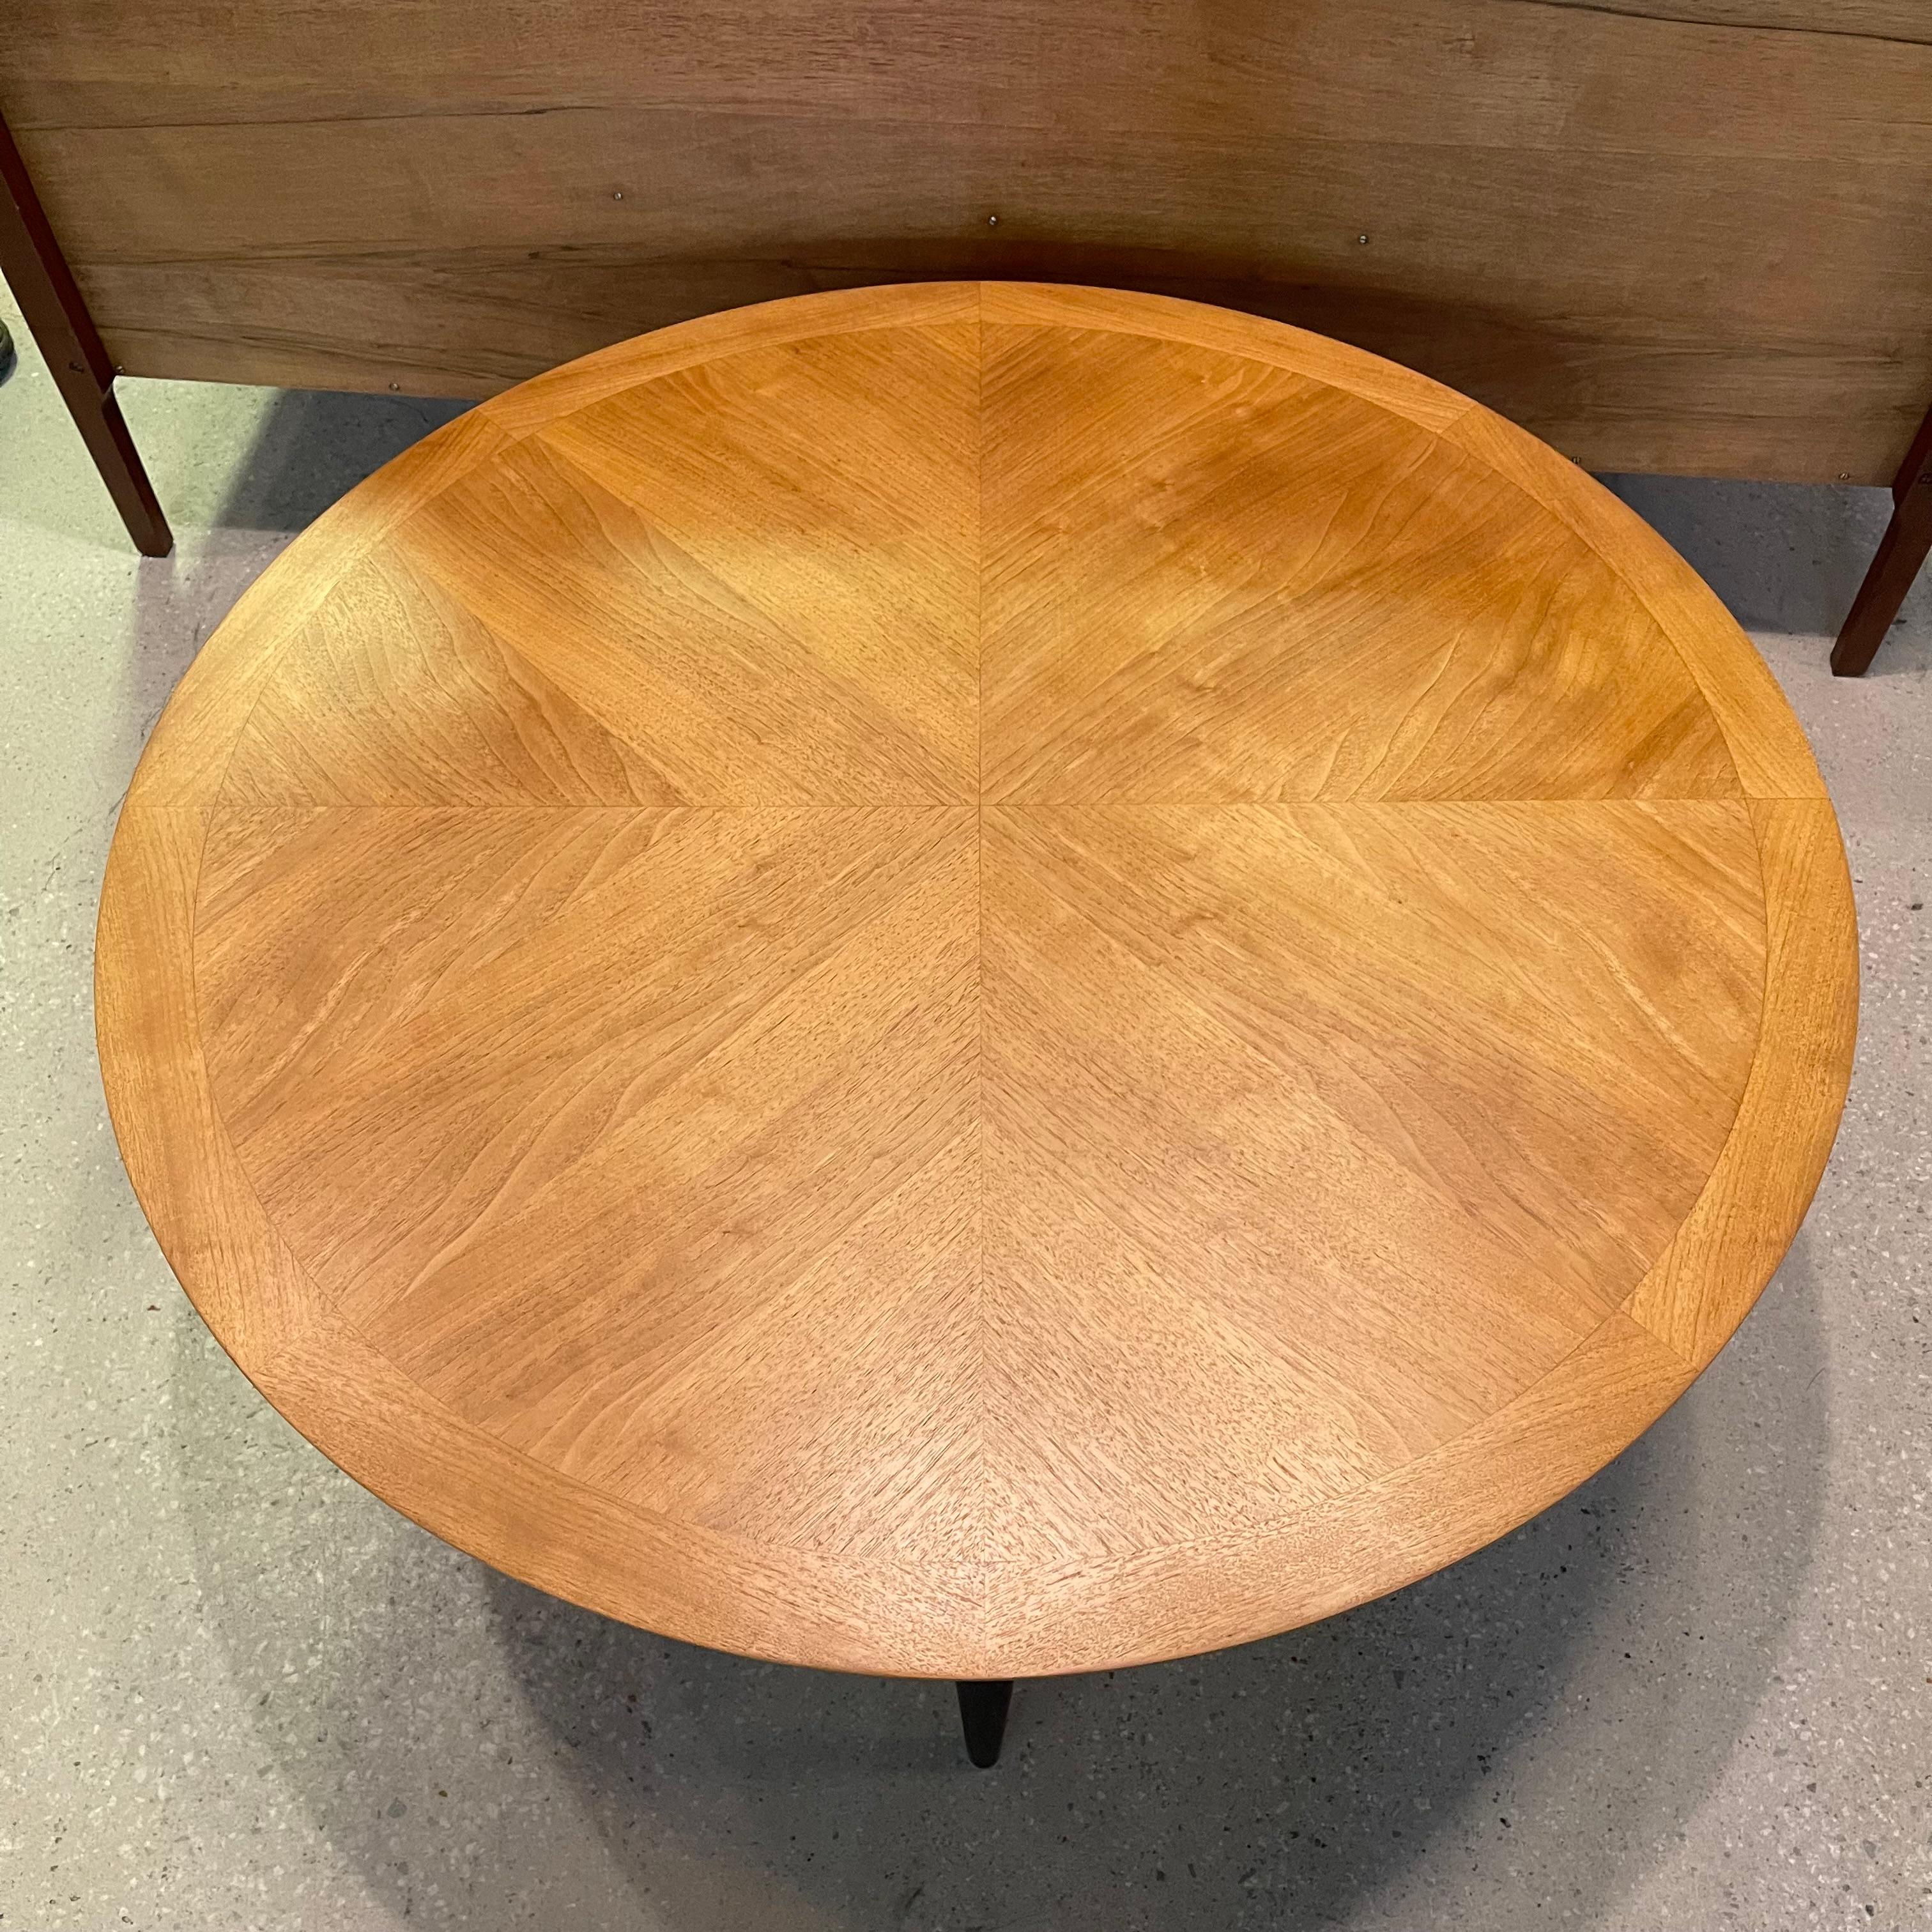 Cane Mid-Century Modern Round Coffee Table By Lane Alta Vista For Sale